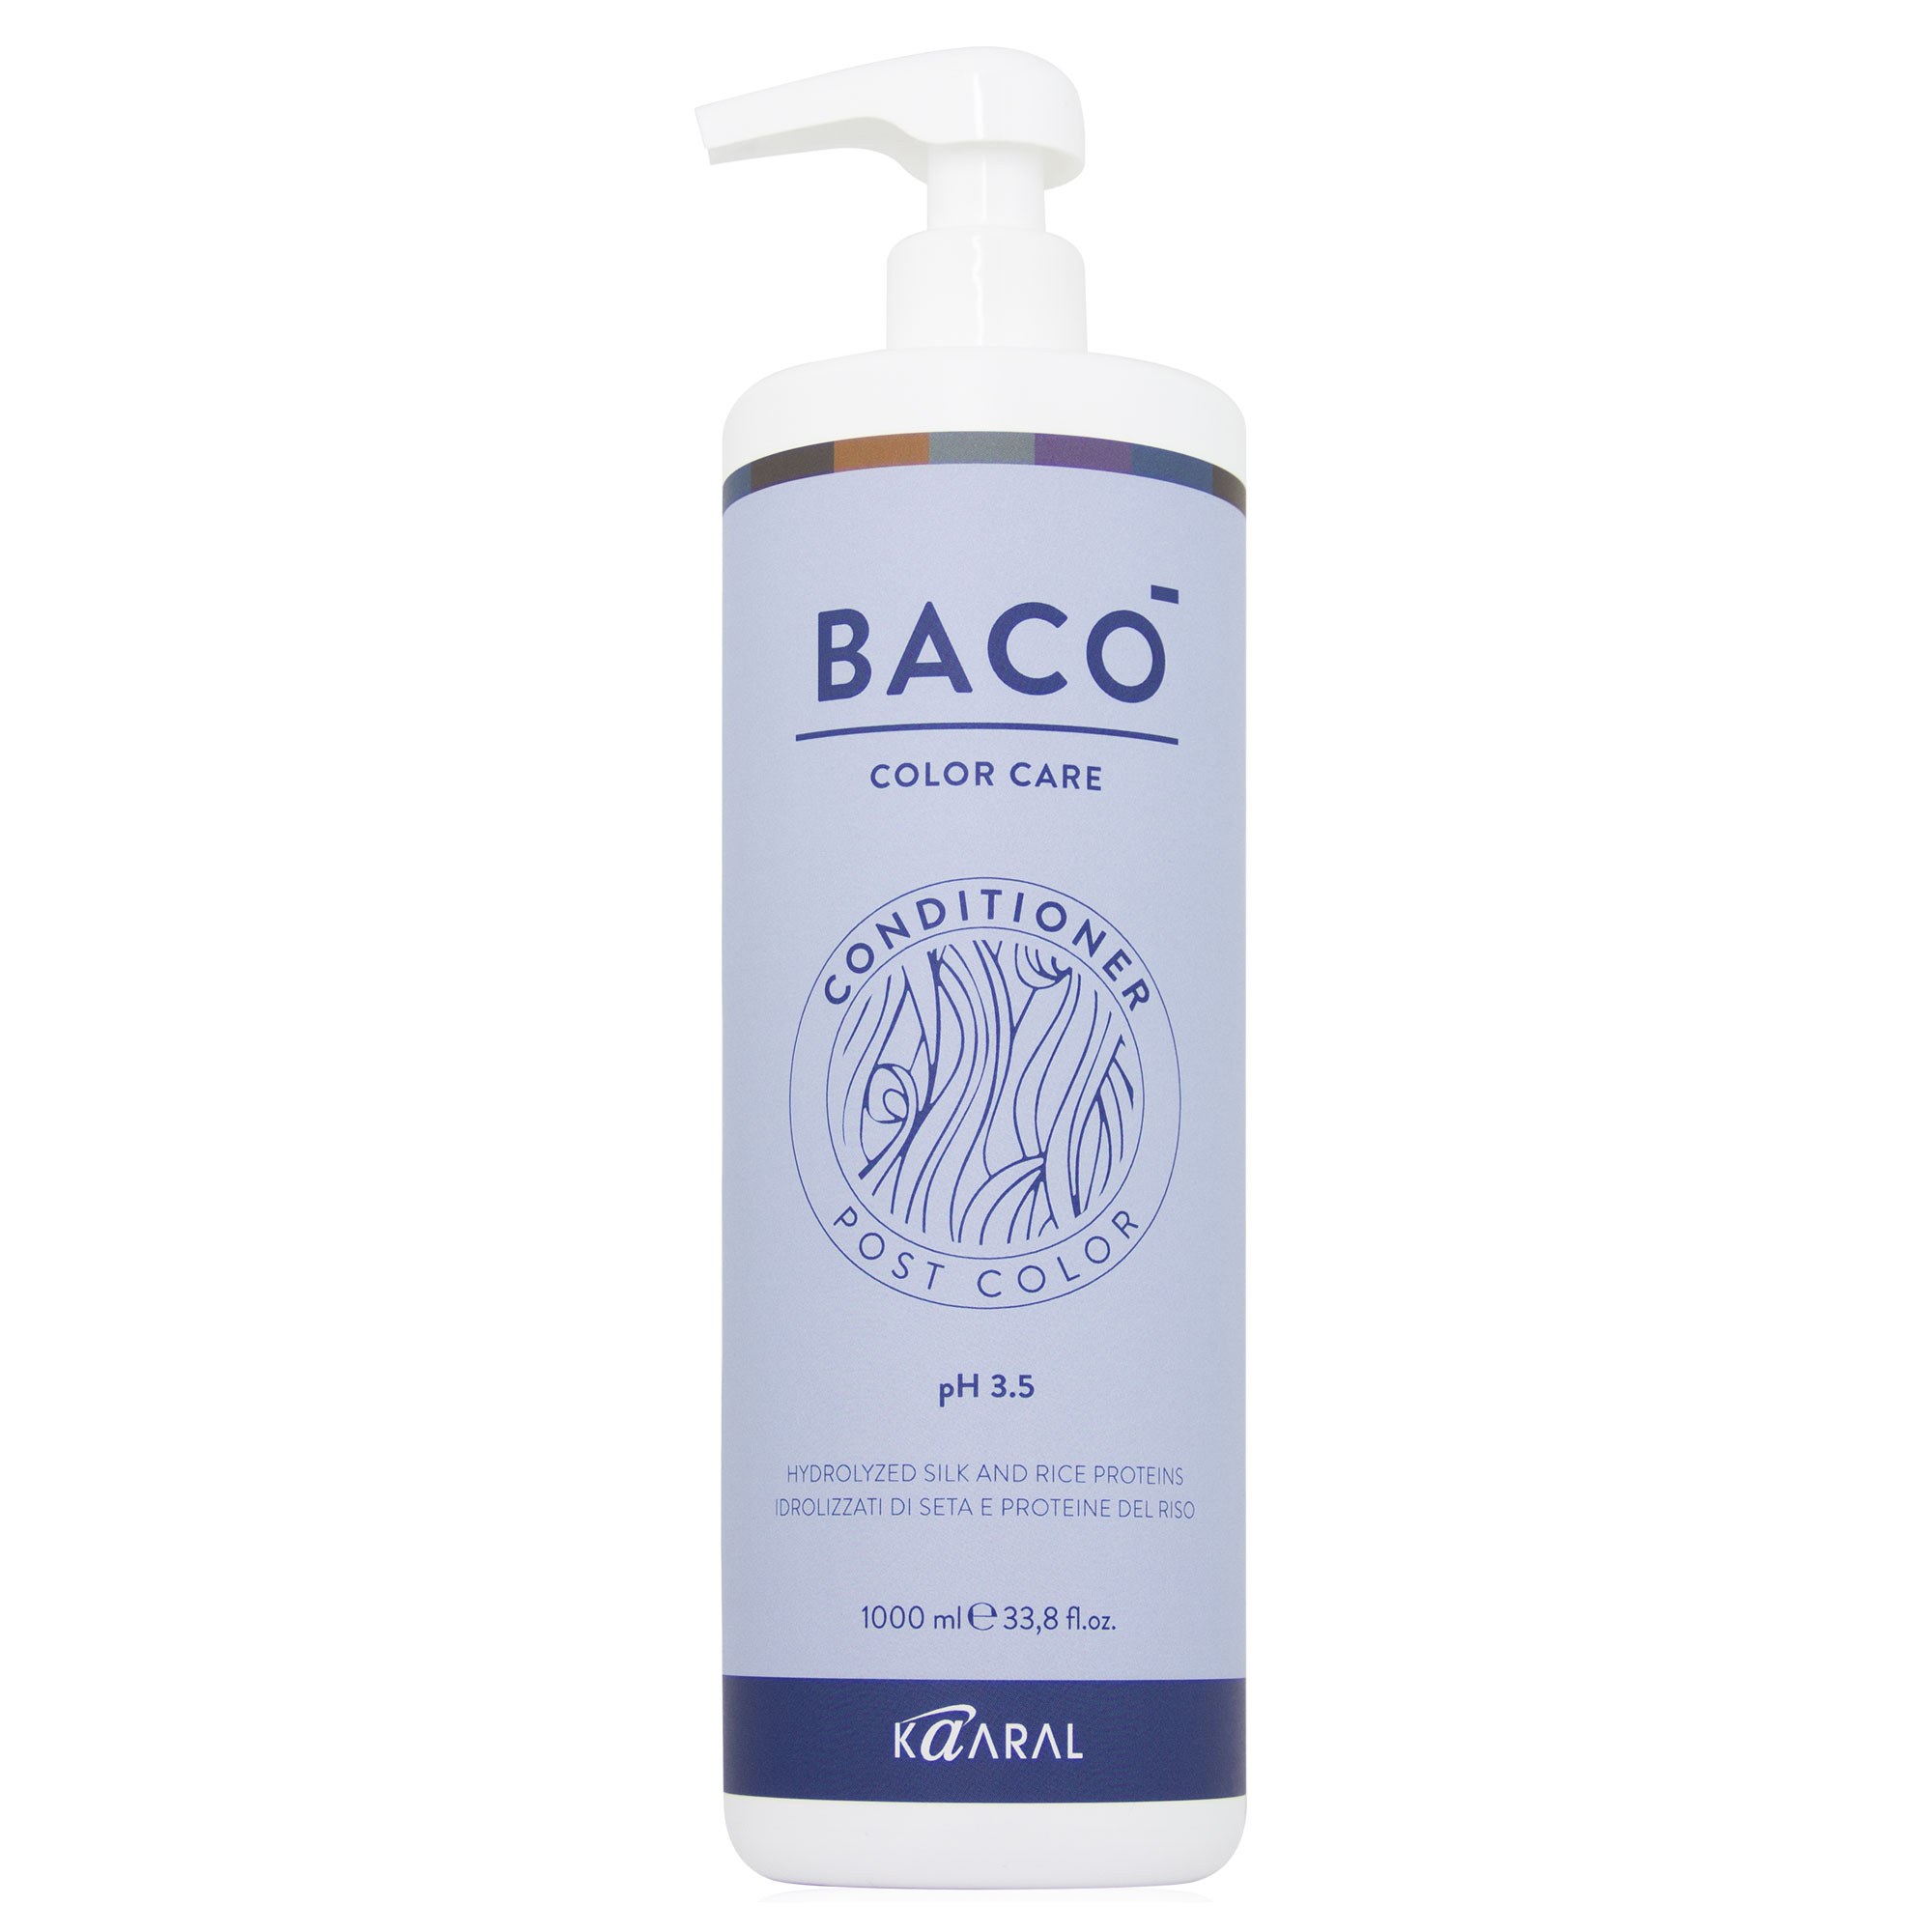 Kaaral Baco Post Color Conditioner pH 3.5 1liter